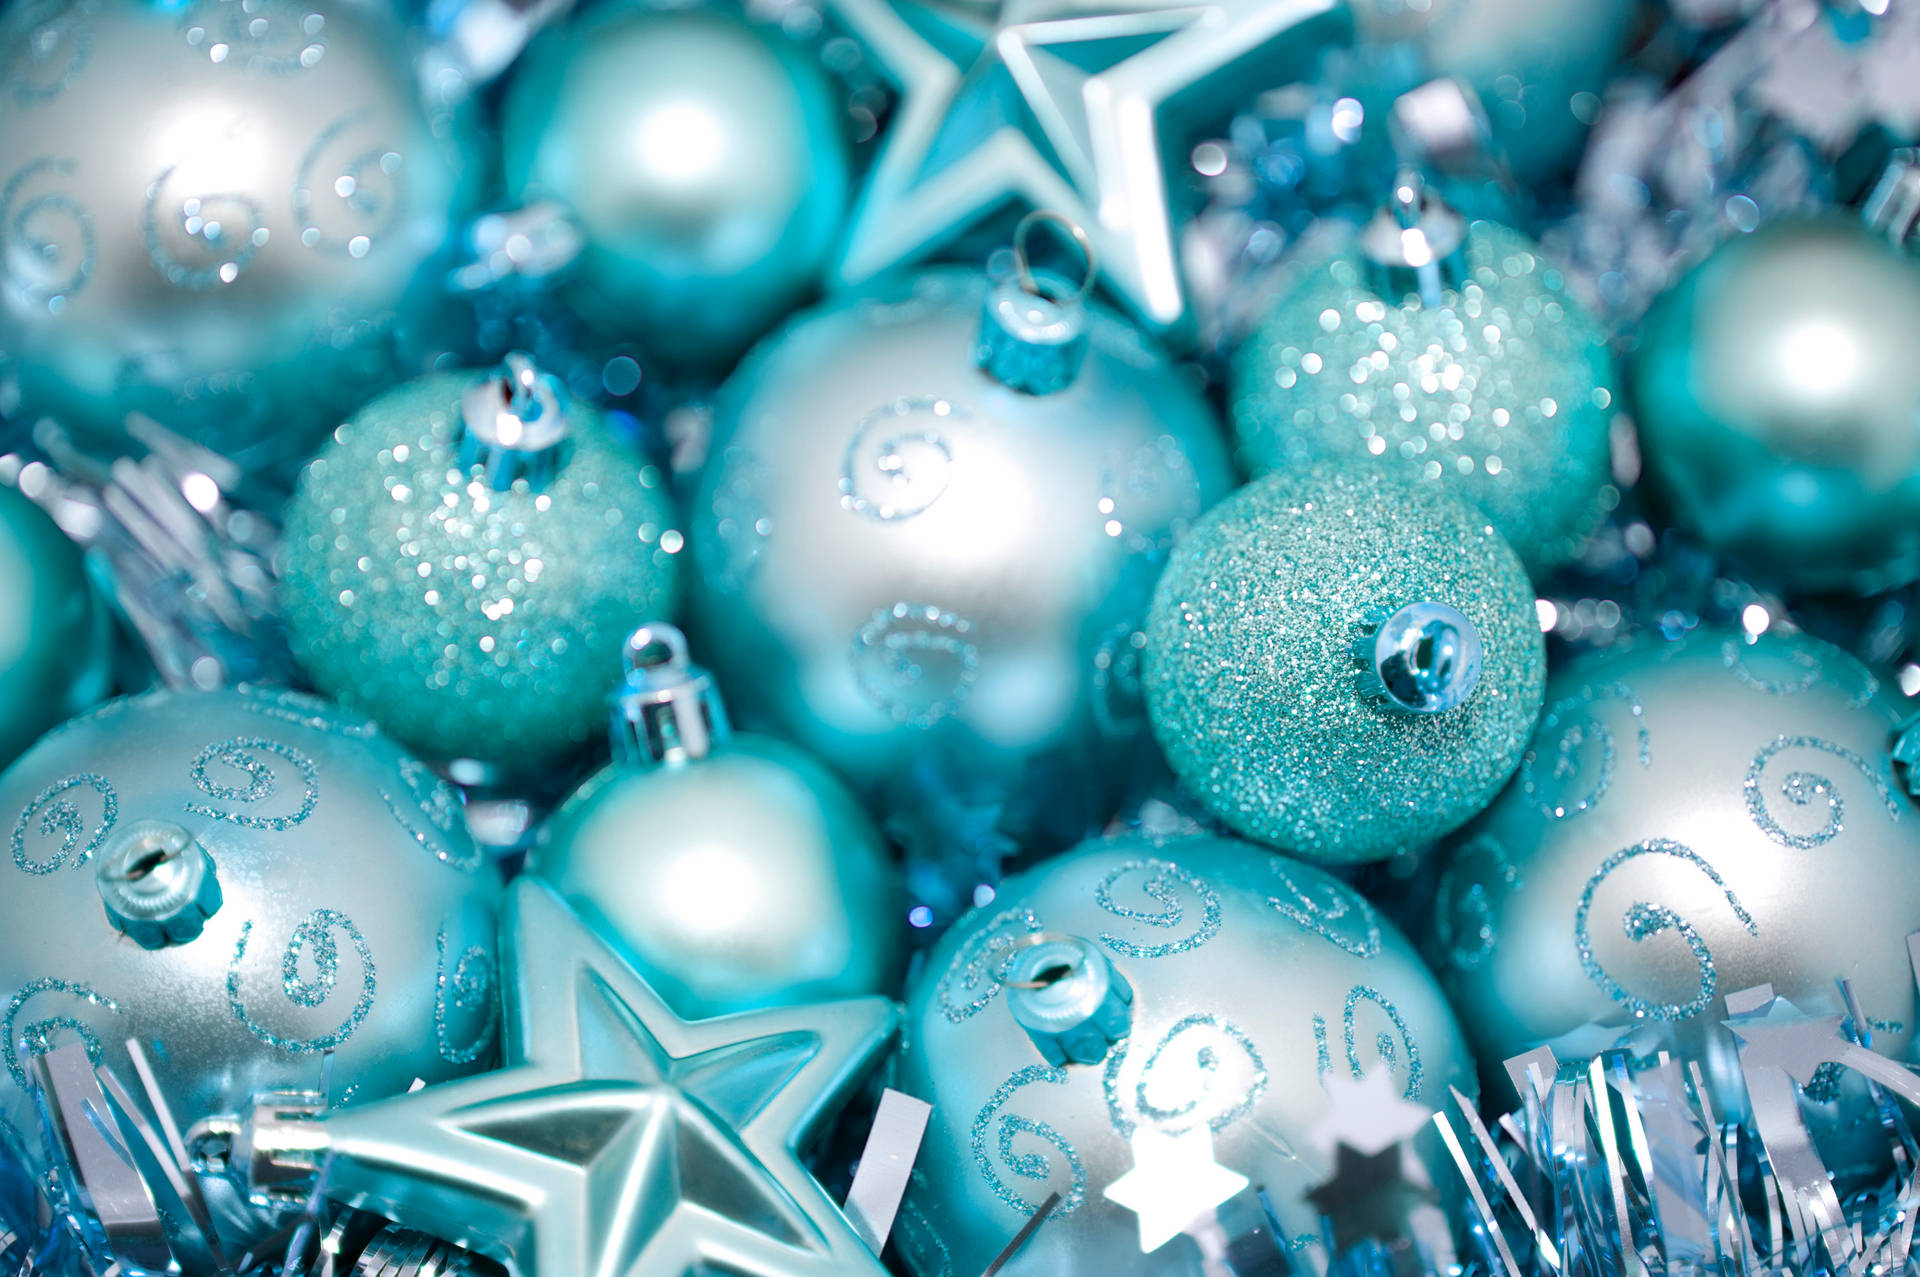 Caption: Cyan Christmas Baubles Adorning The Festive Holidays Wallpaper